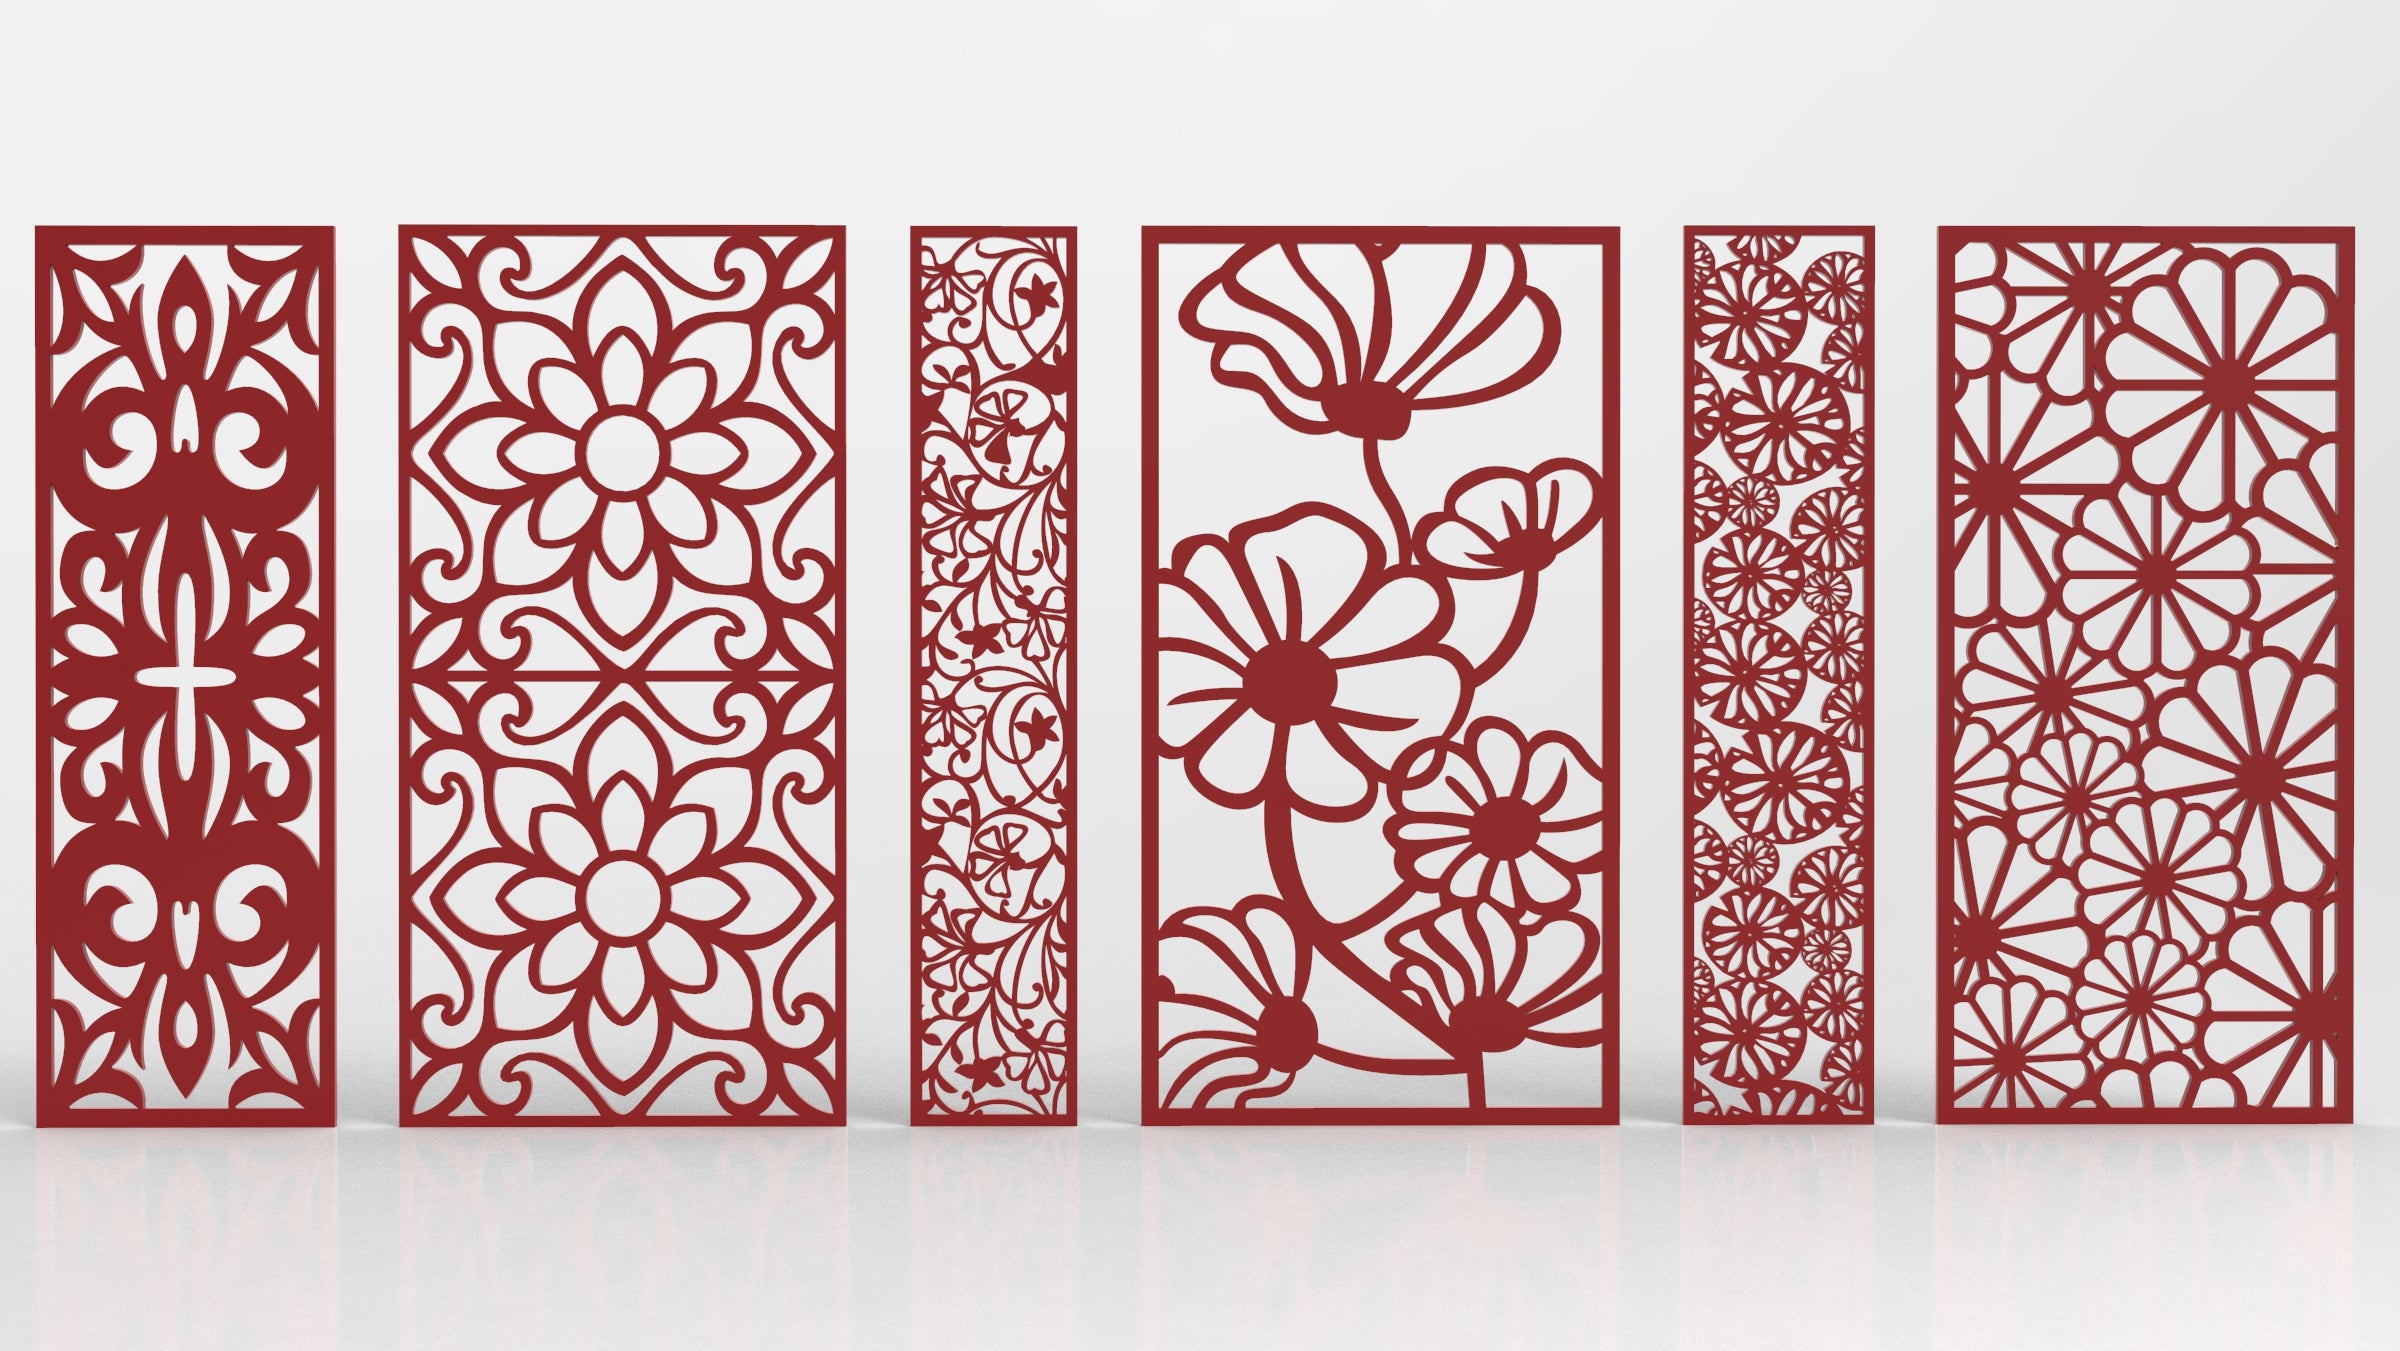 Ornaments for decorative partitions panel screen CNC Laser Cutting File | SVG, DXF, AI |#C022|